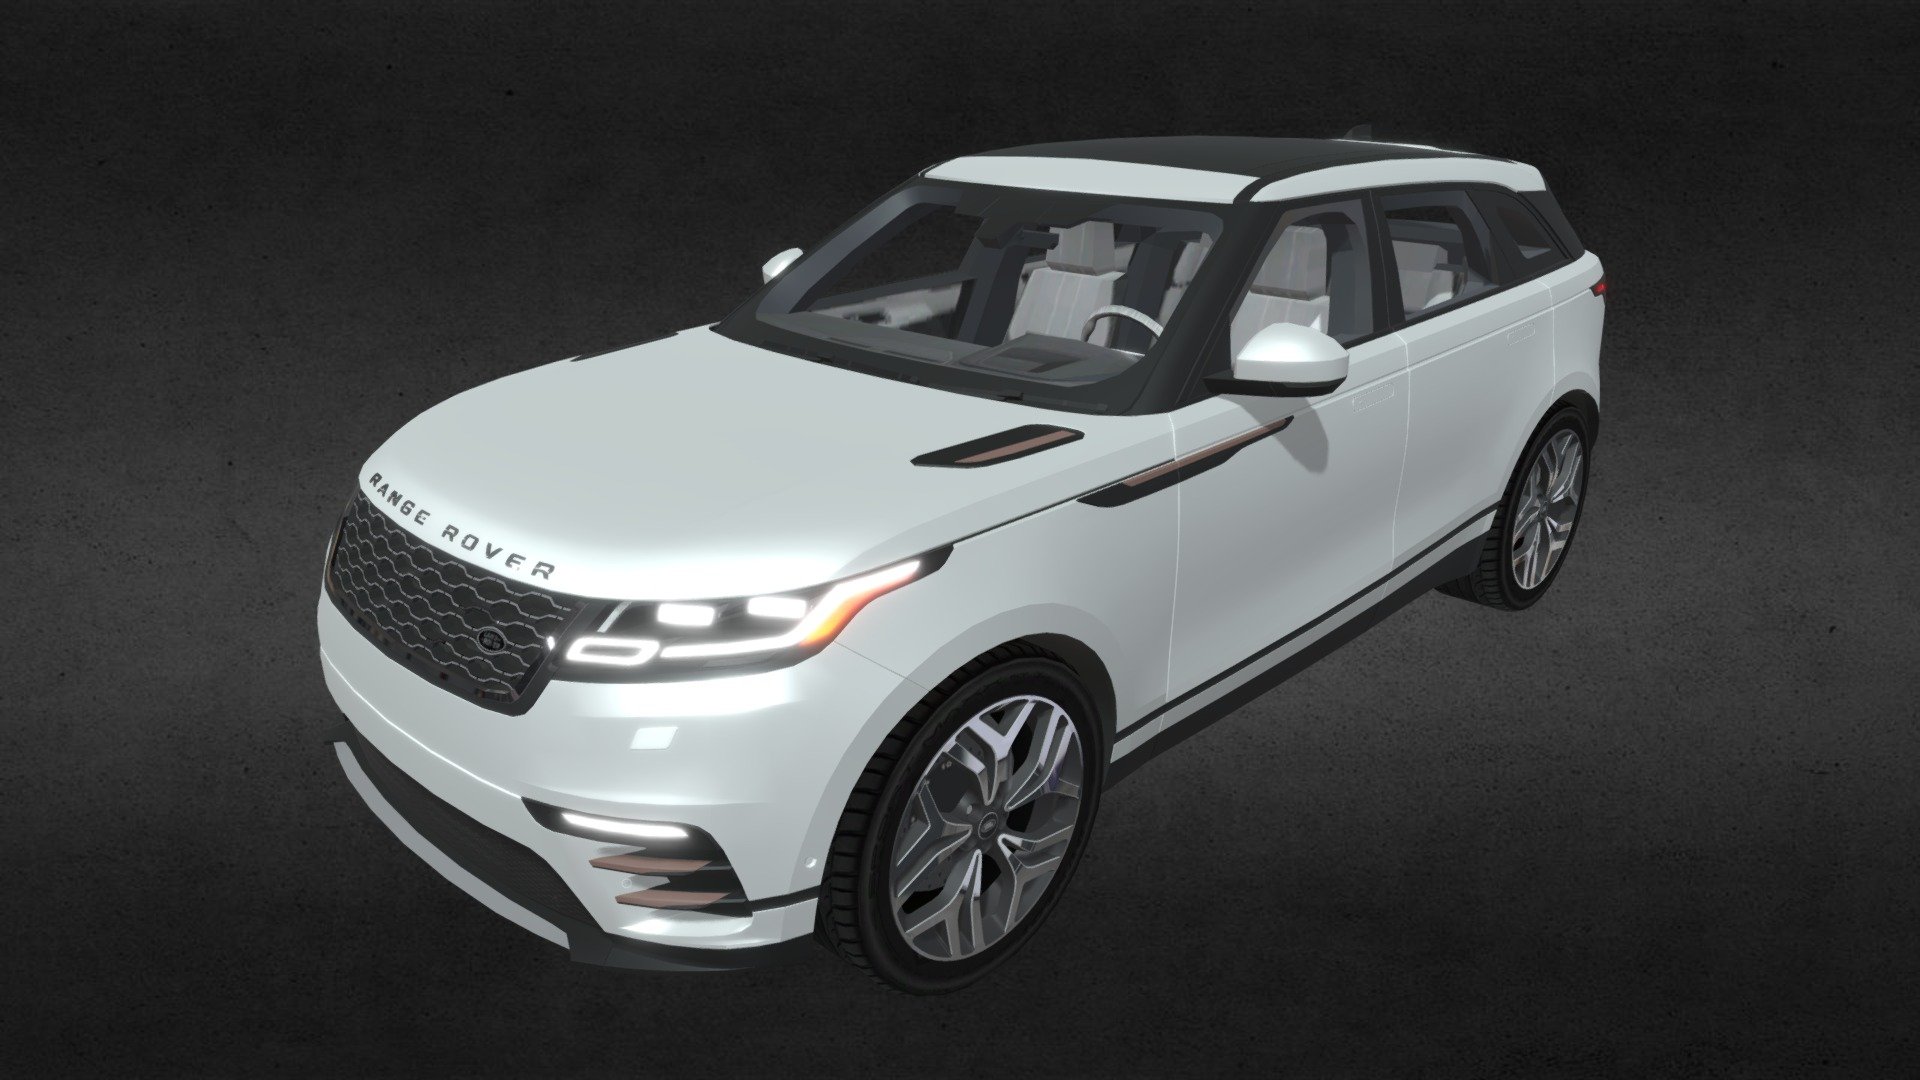 Created in Blender. 
This is a Land Rover Range Rover Velar obj blend with textures includes 3d model